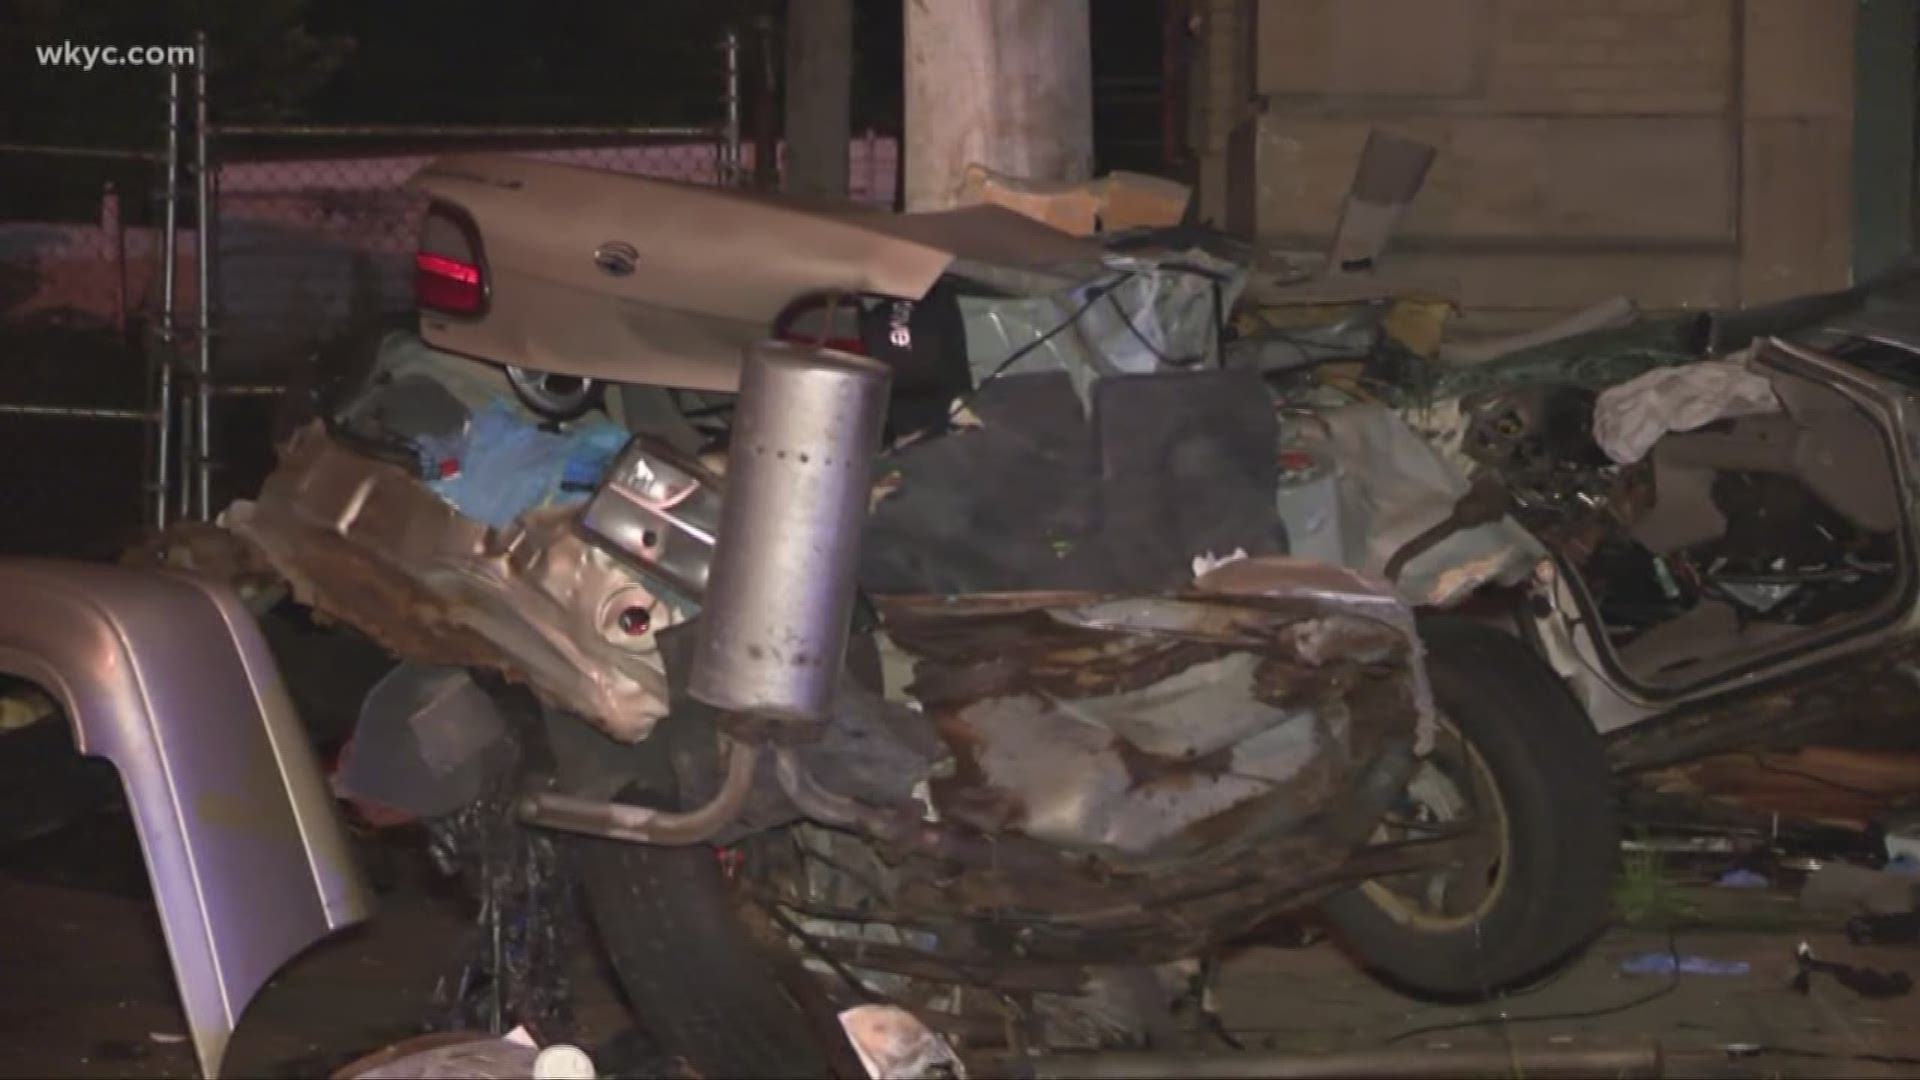 May 31, 2019: A serious crash is being investigated by Cleveland police and their Accident Investigation Unit. Police say two people died Thursday night when a car crashed on East 131 Street at Bartlett Avenue. Both were found dead when emergency crews arrived around 11:30 p.m.